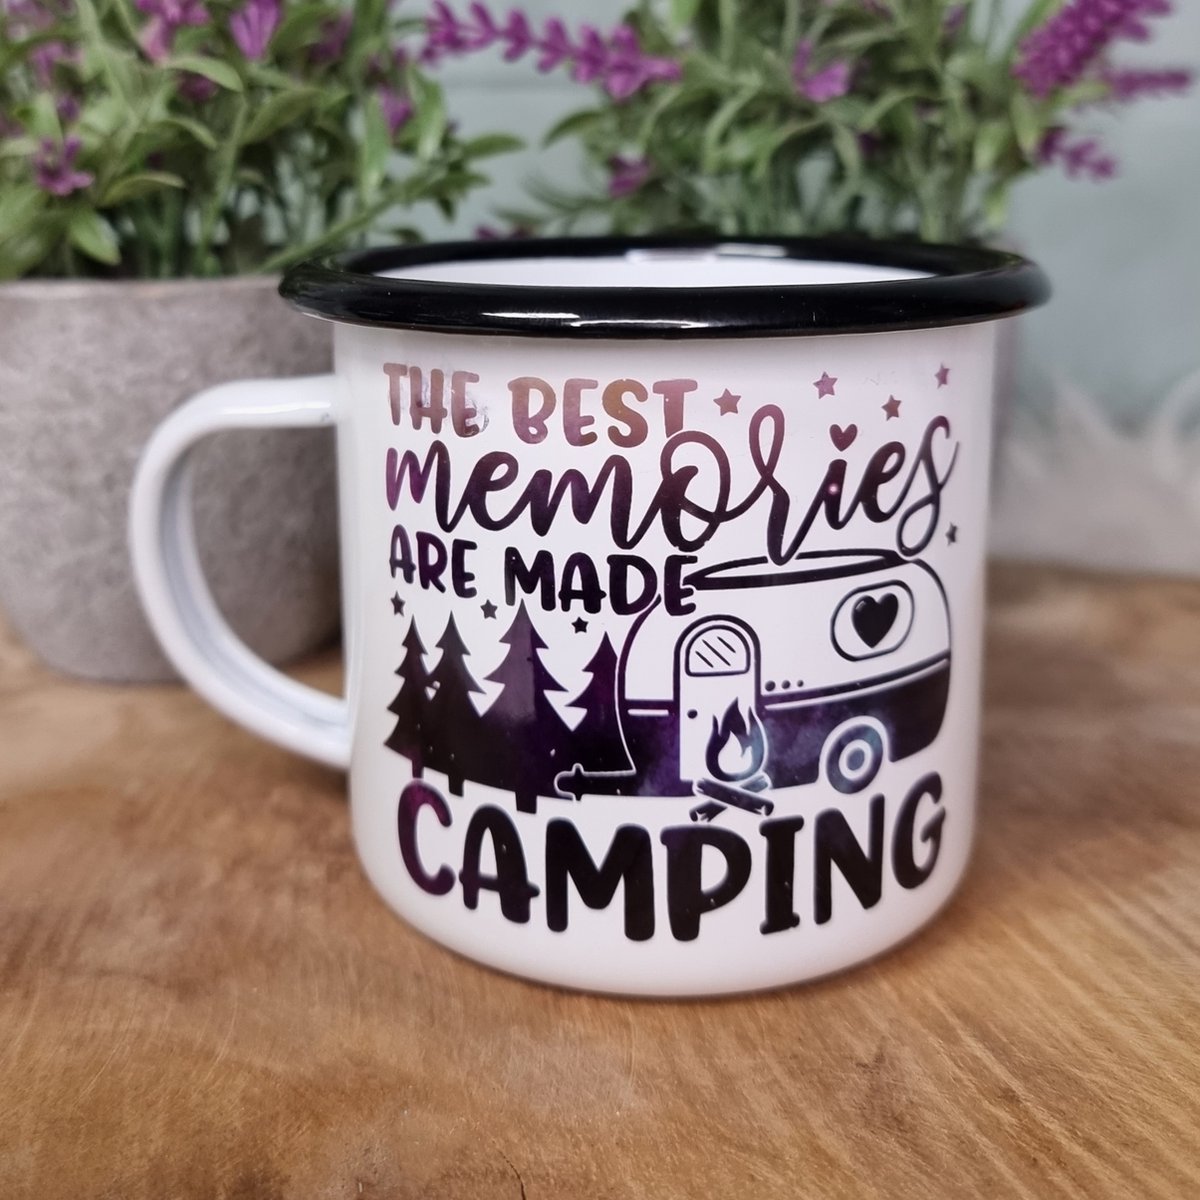 The Best Memories Are Made Camping Mok - Emaille mok